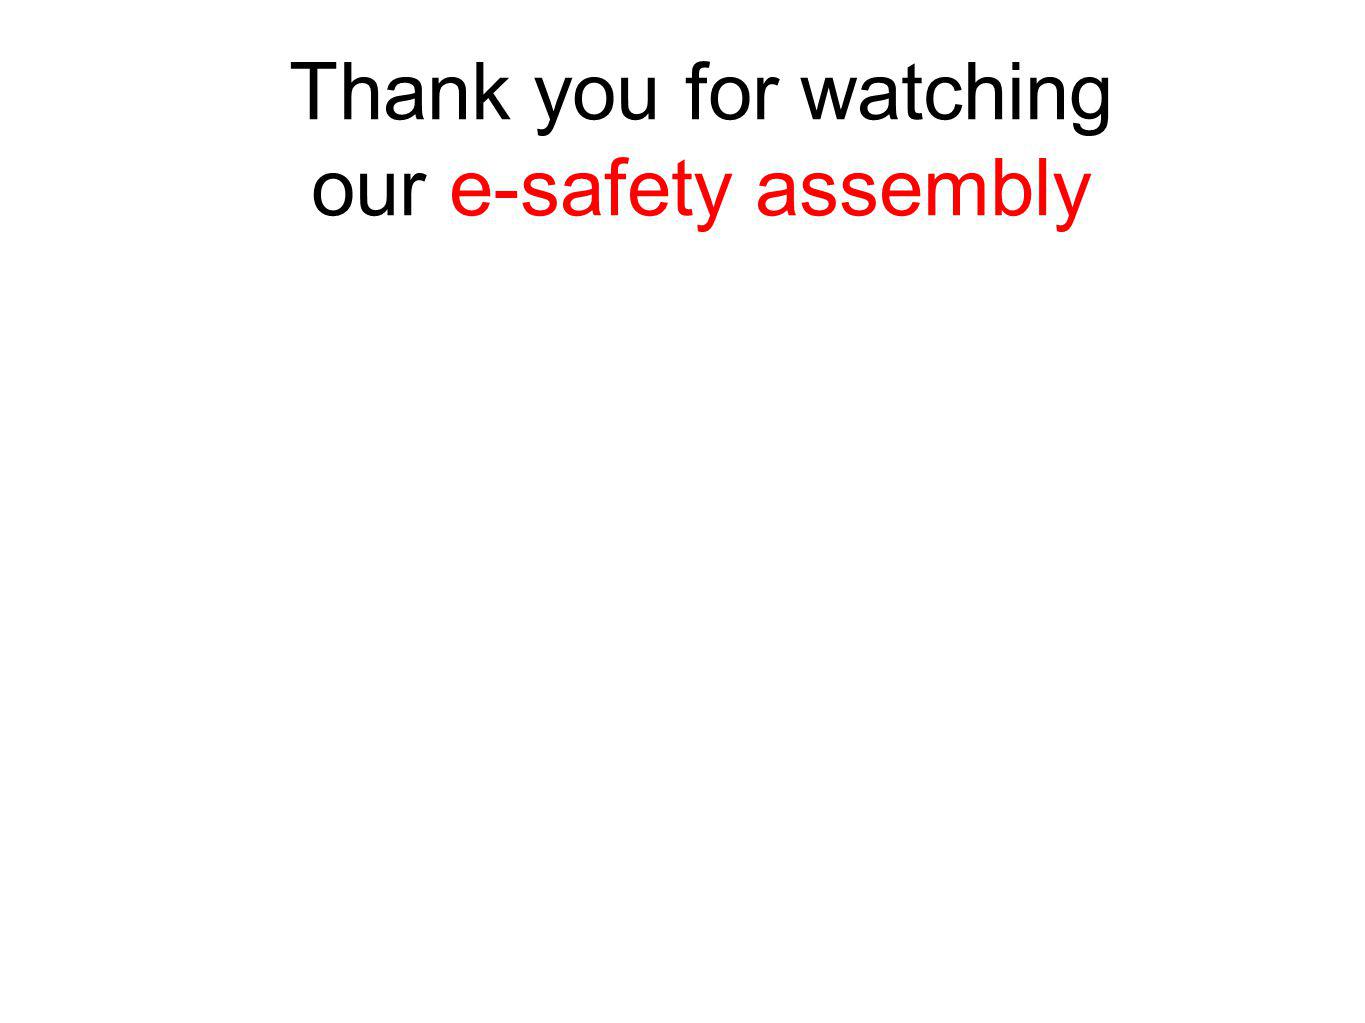 Thank you for watching our e-safety assembly